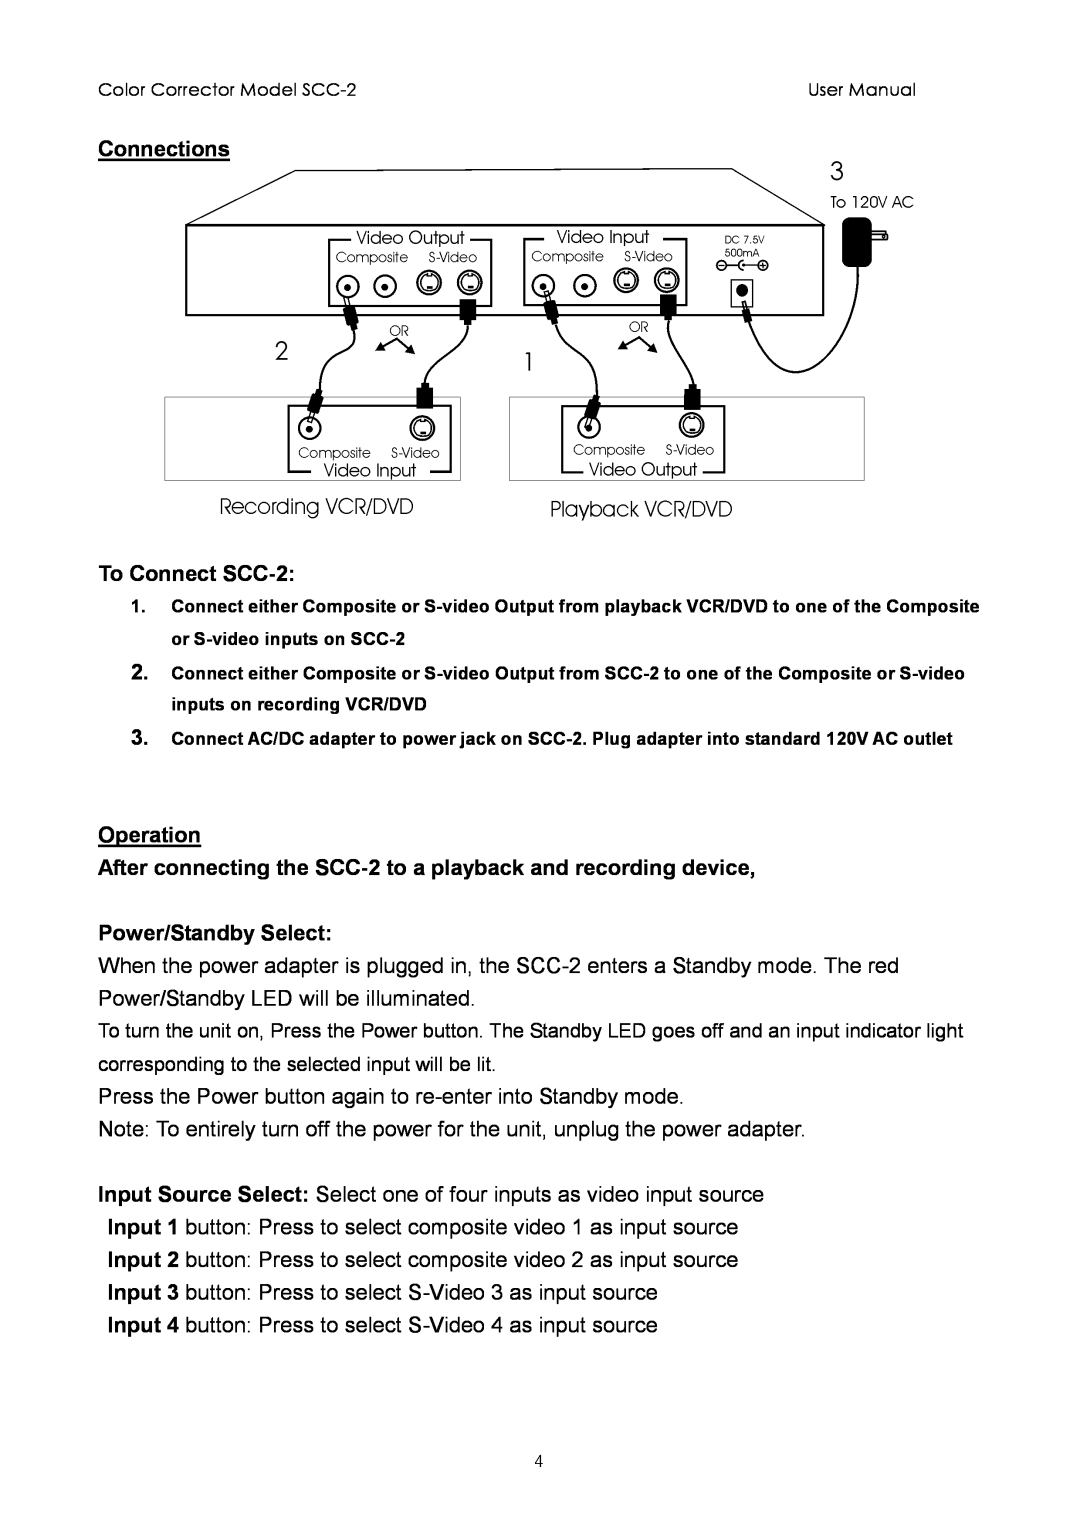 Sima Products user manual Connections, To Connect SCC-2, Operation, Power/Standby Select 